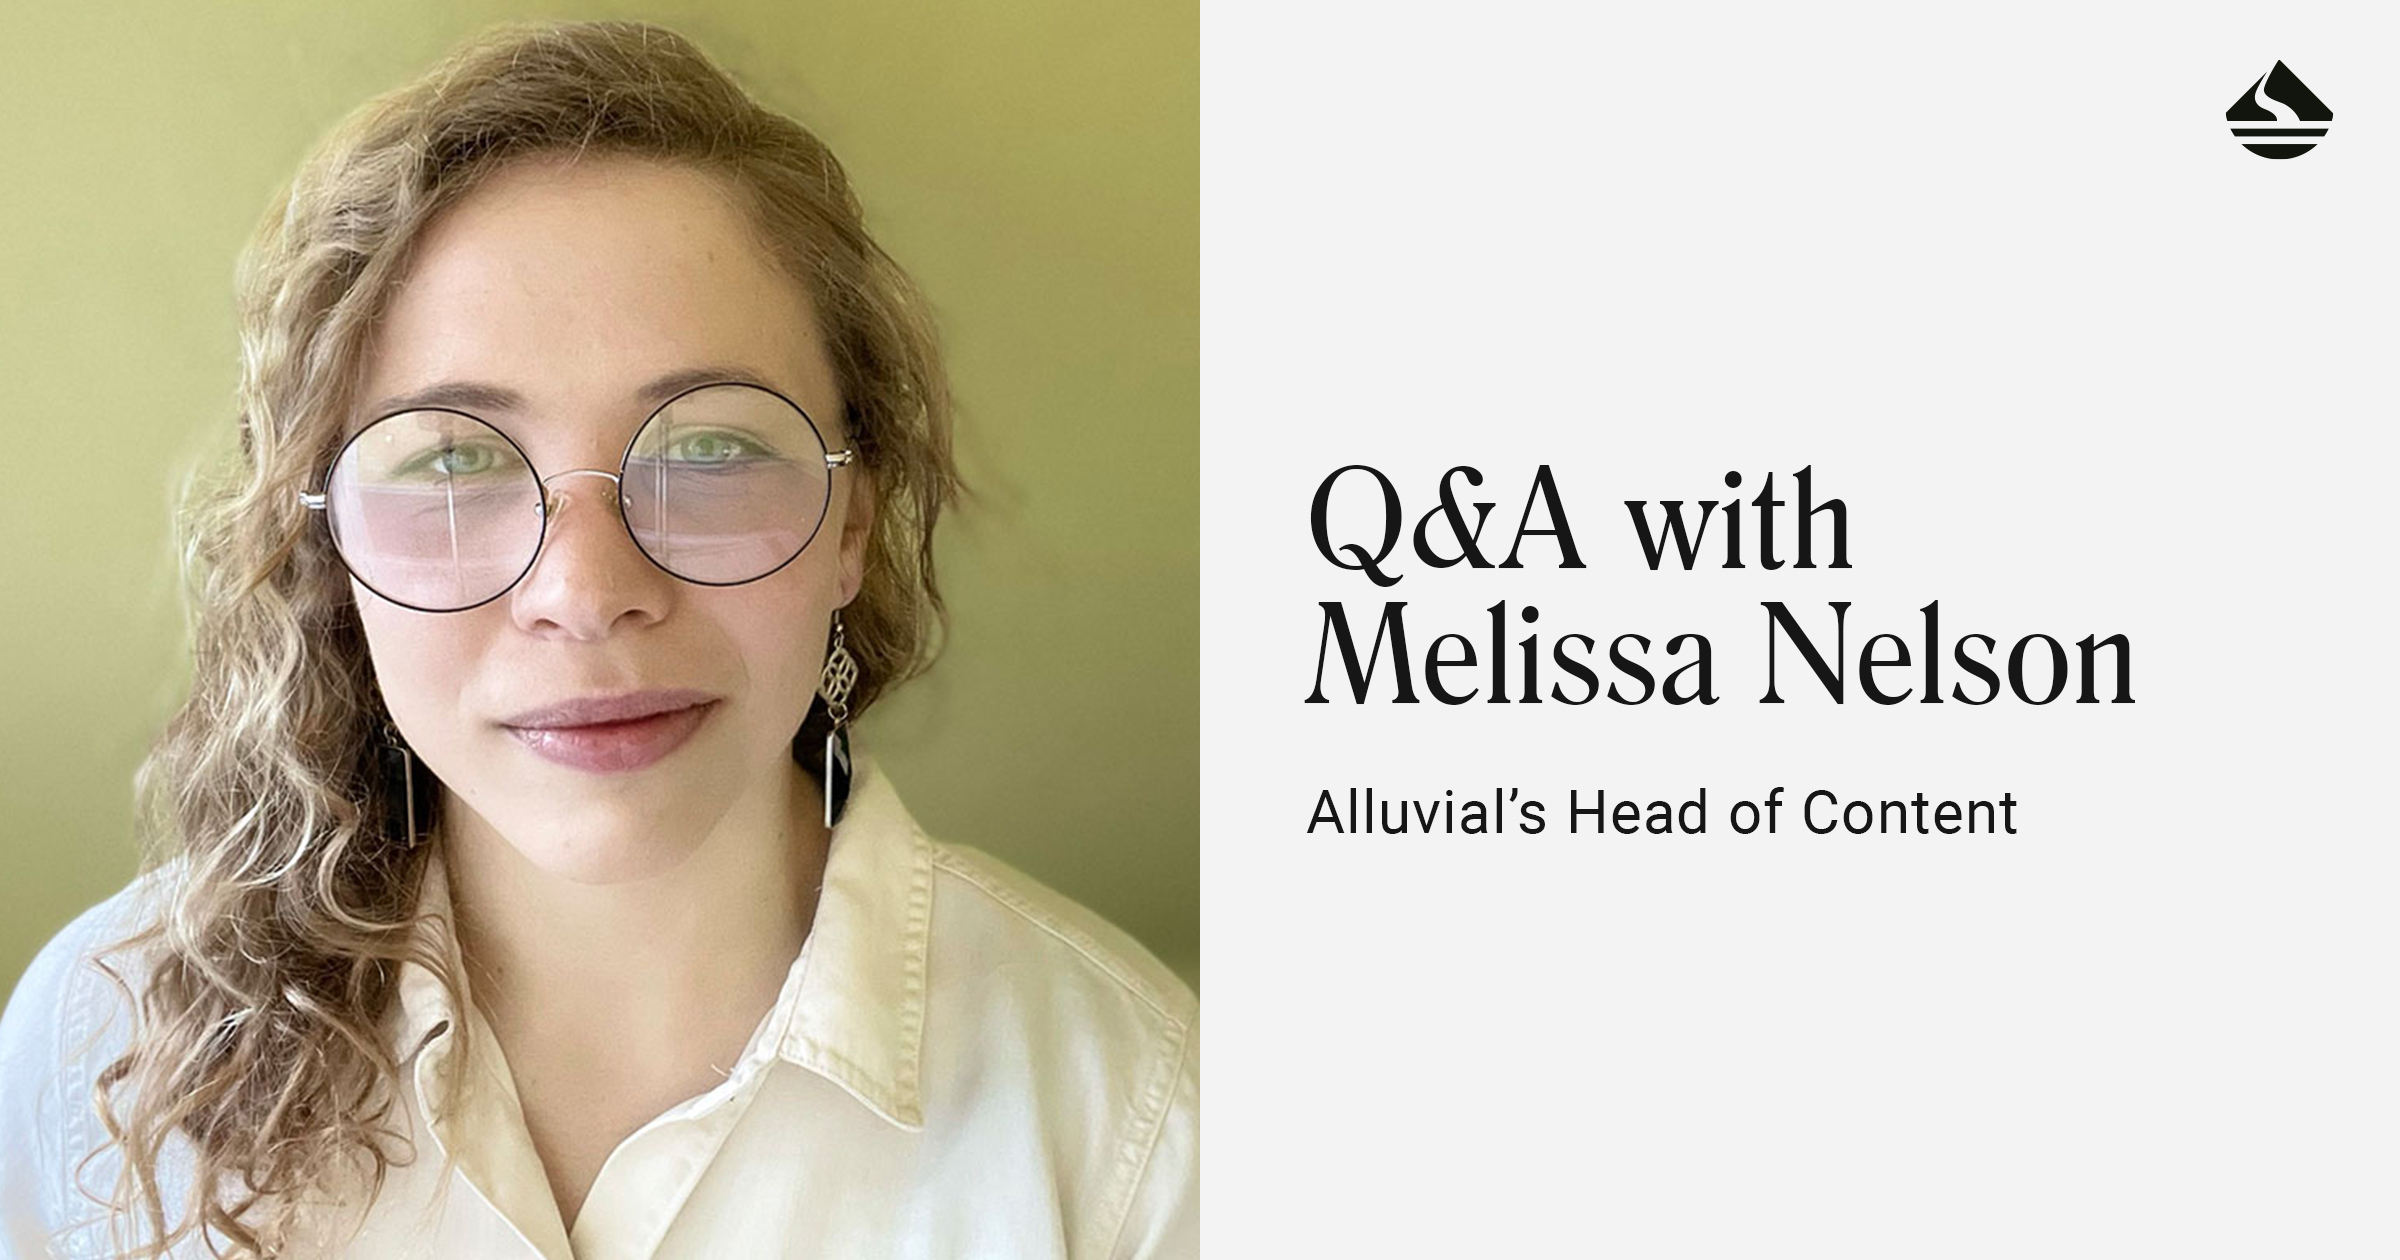 Q&A with Melissa Nelson, Alluvial's Head of Content